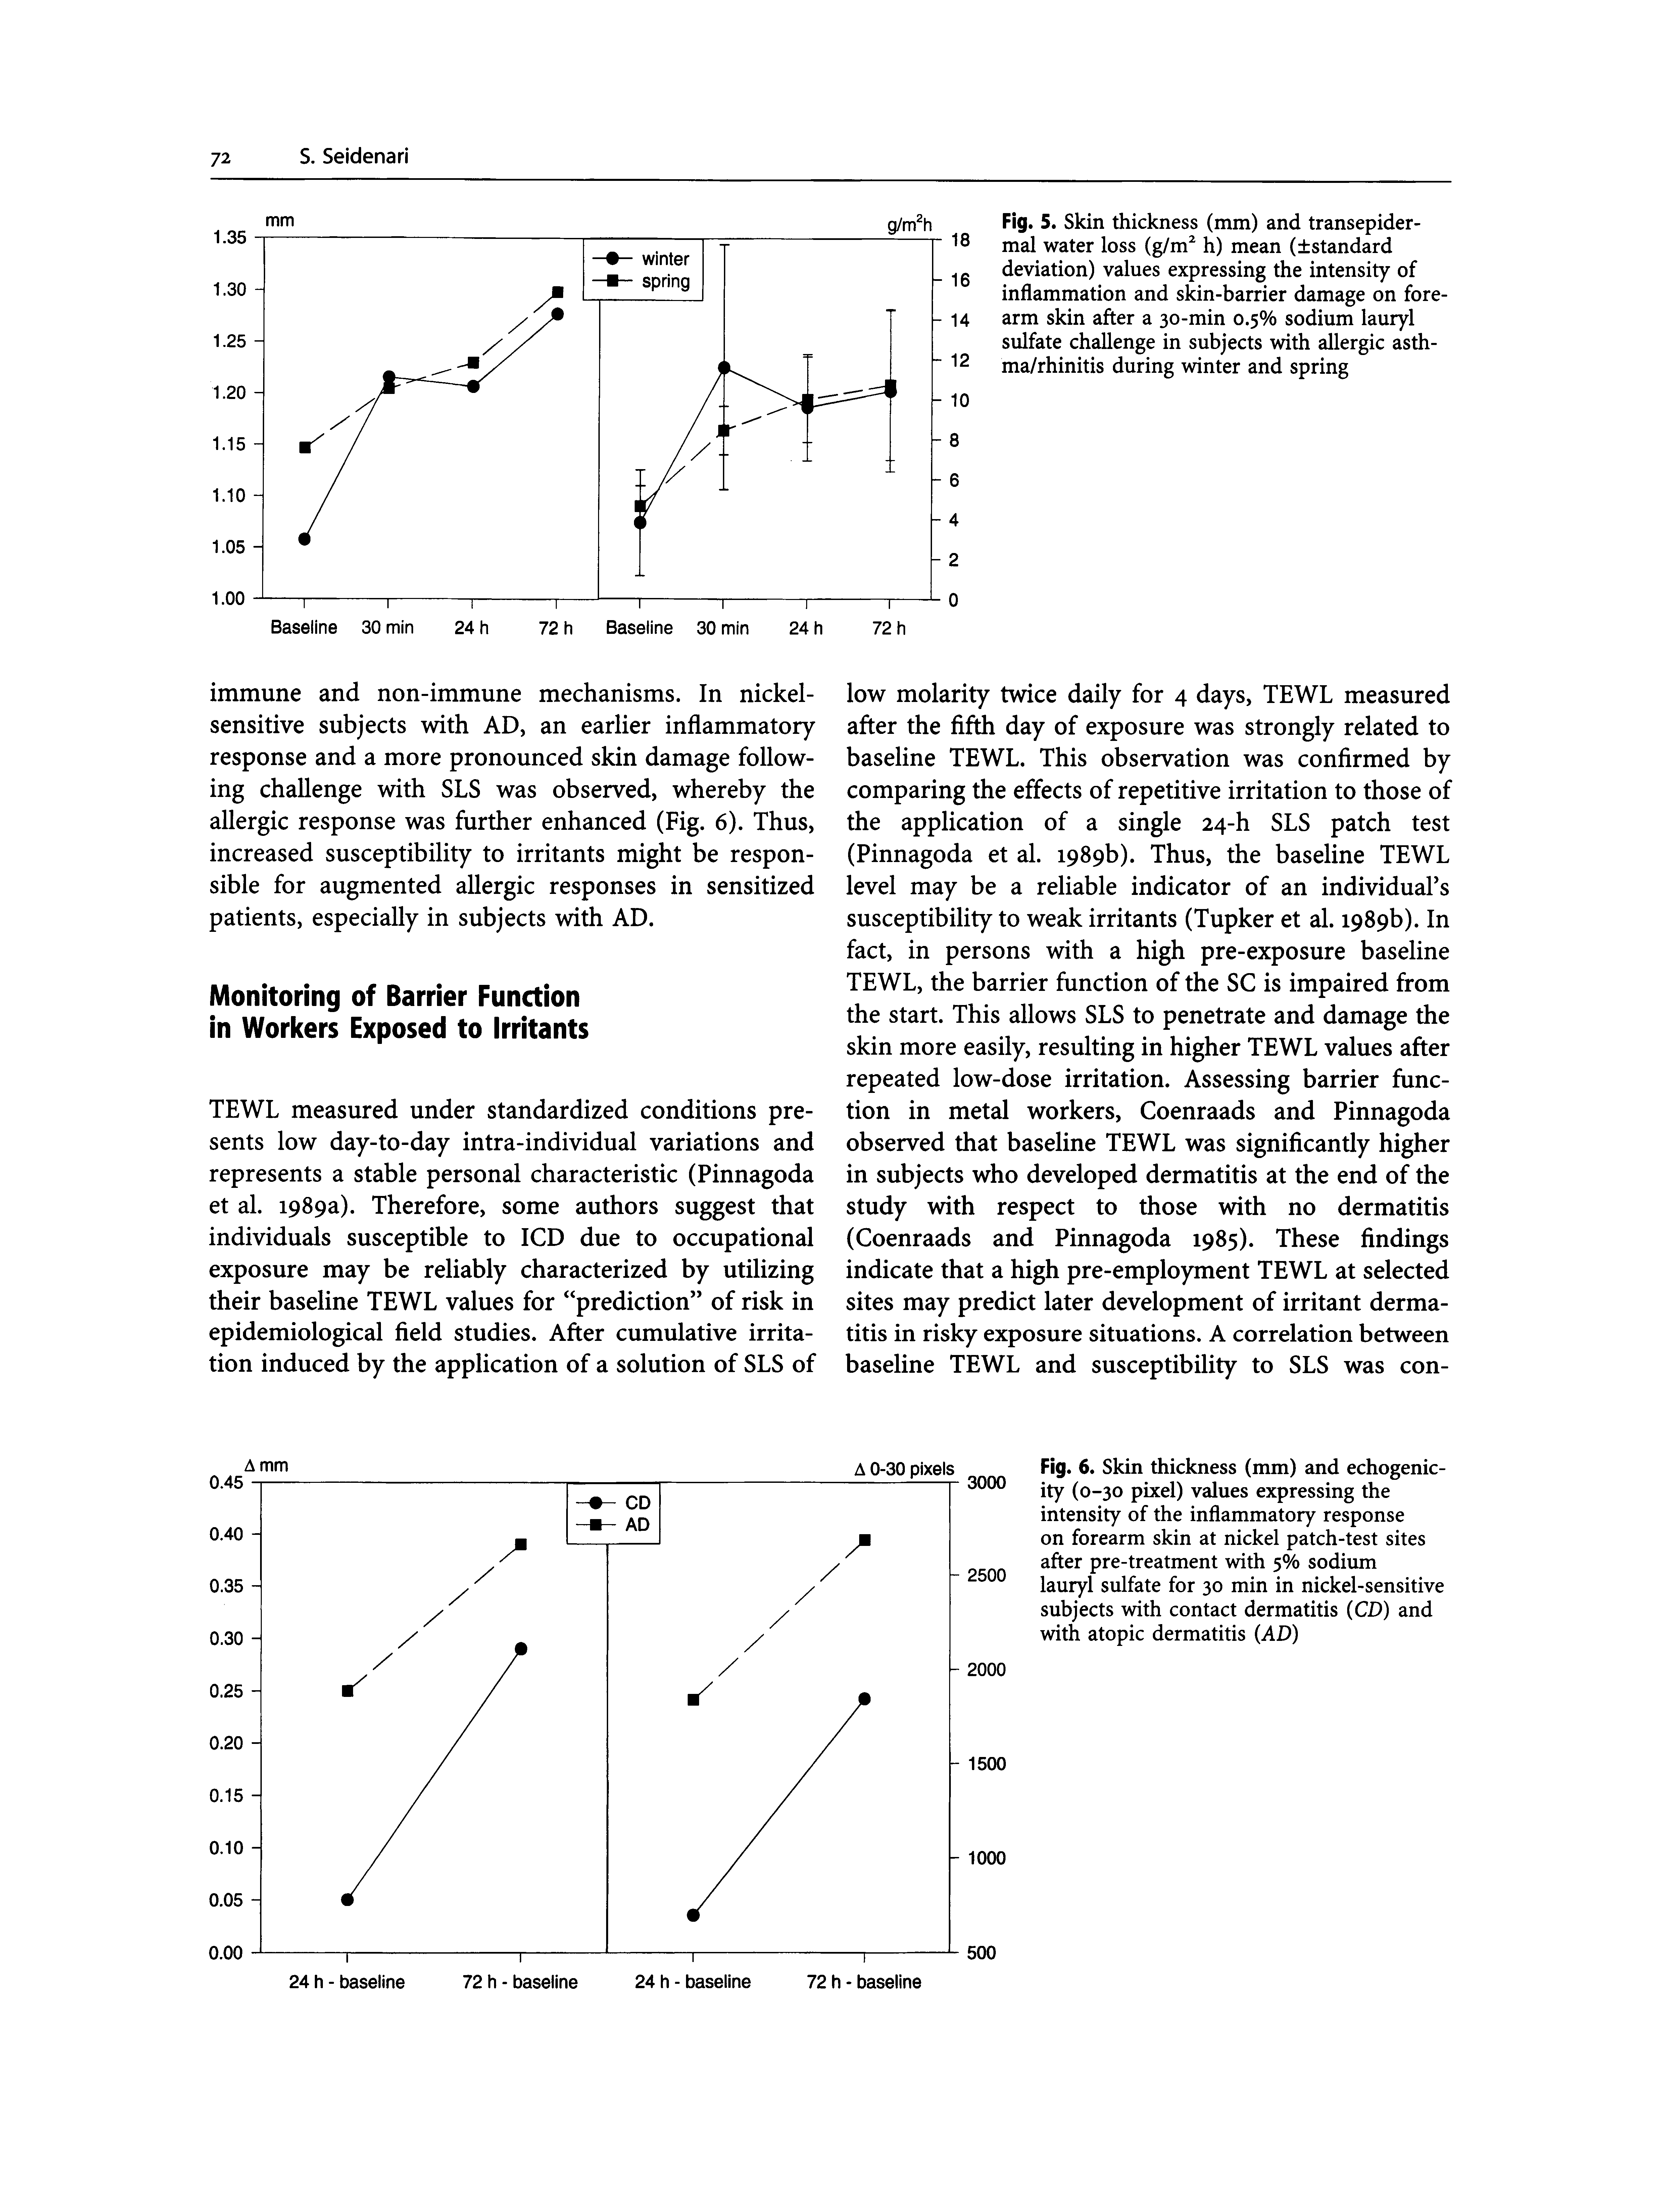 Fig. 6. Skin thickness (mm) and echogenicity (0-30 pixel) values expressing the intensity of the inflammatory response on forearm skin at nickel patch-test sites after pre-treatment with 5% sodium lauryl sulfate for 30 min in nickel-sensitive subjects with contact dermatitis (CD) and with atopic dermatitis (AD)...